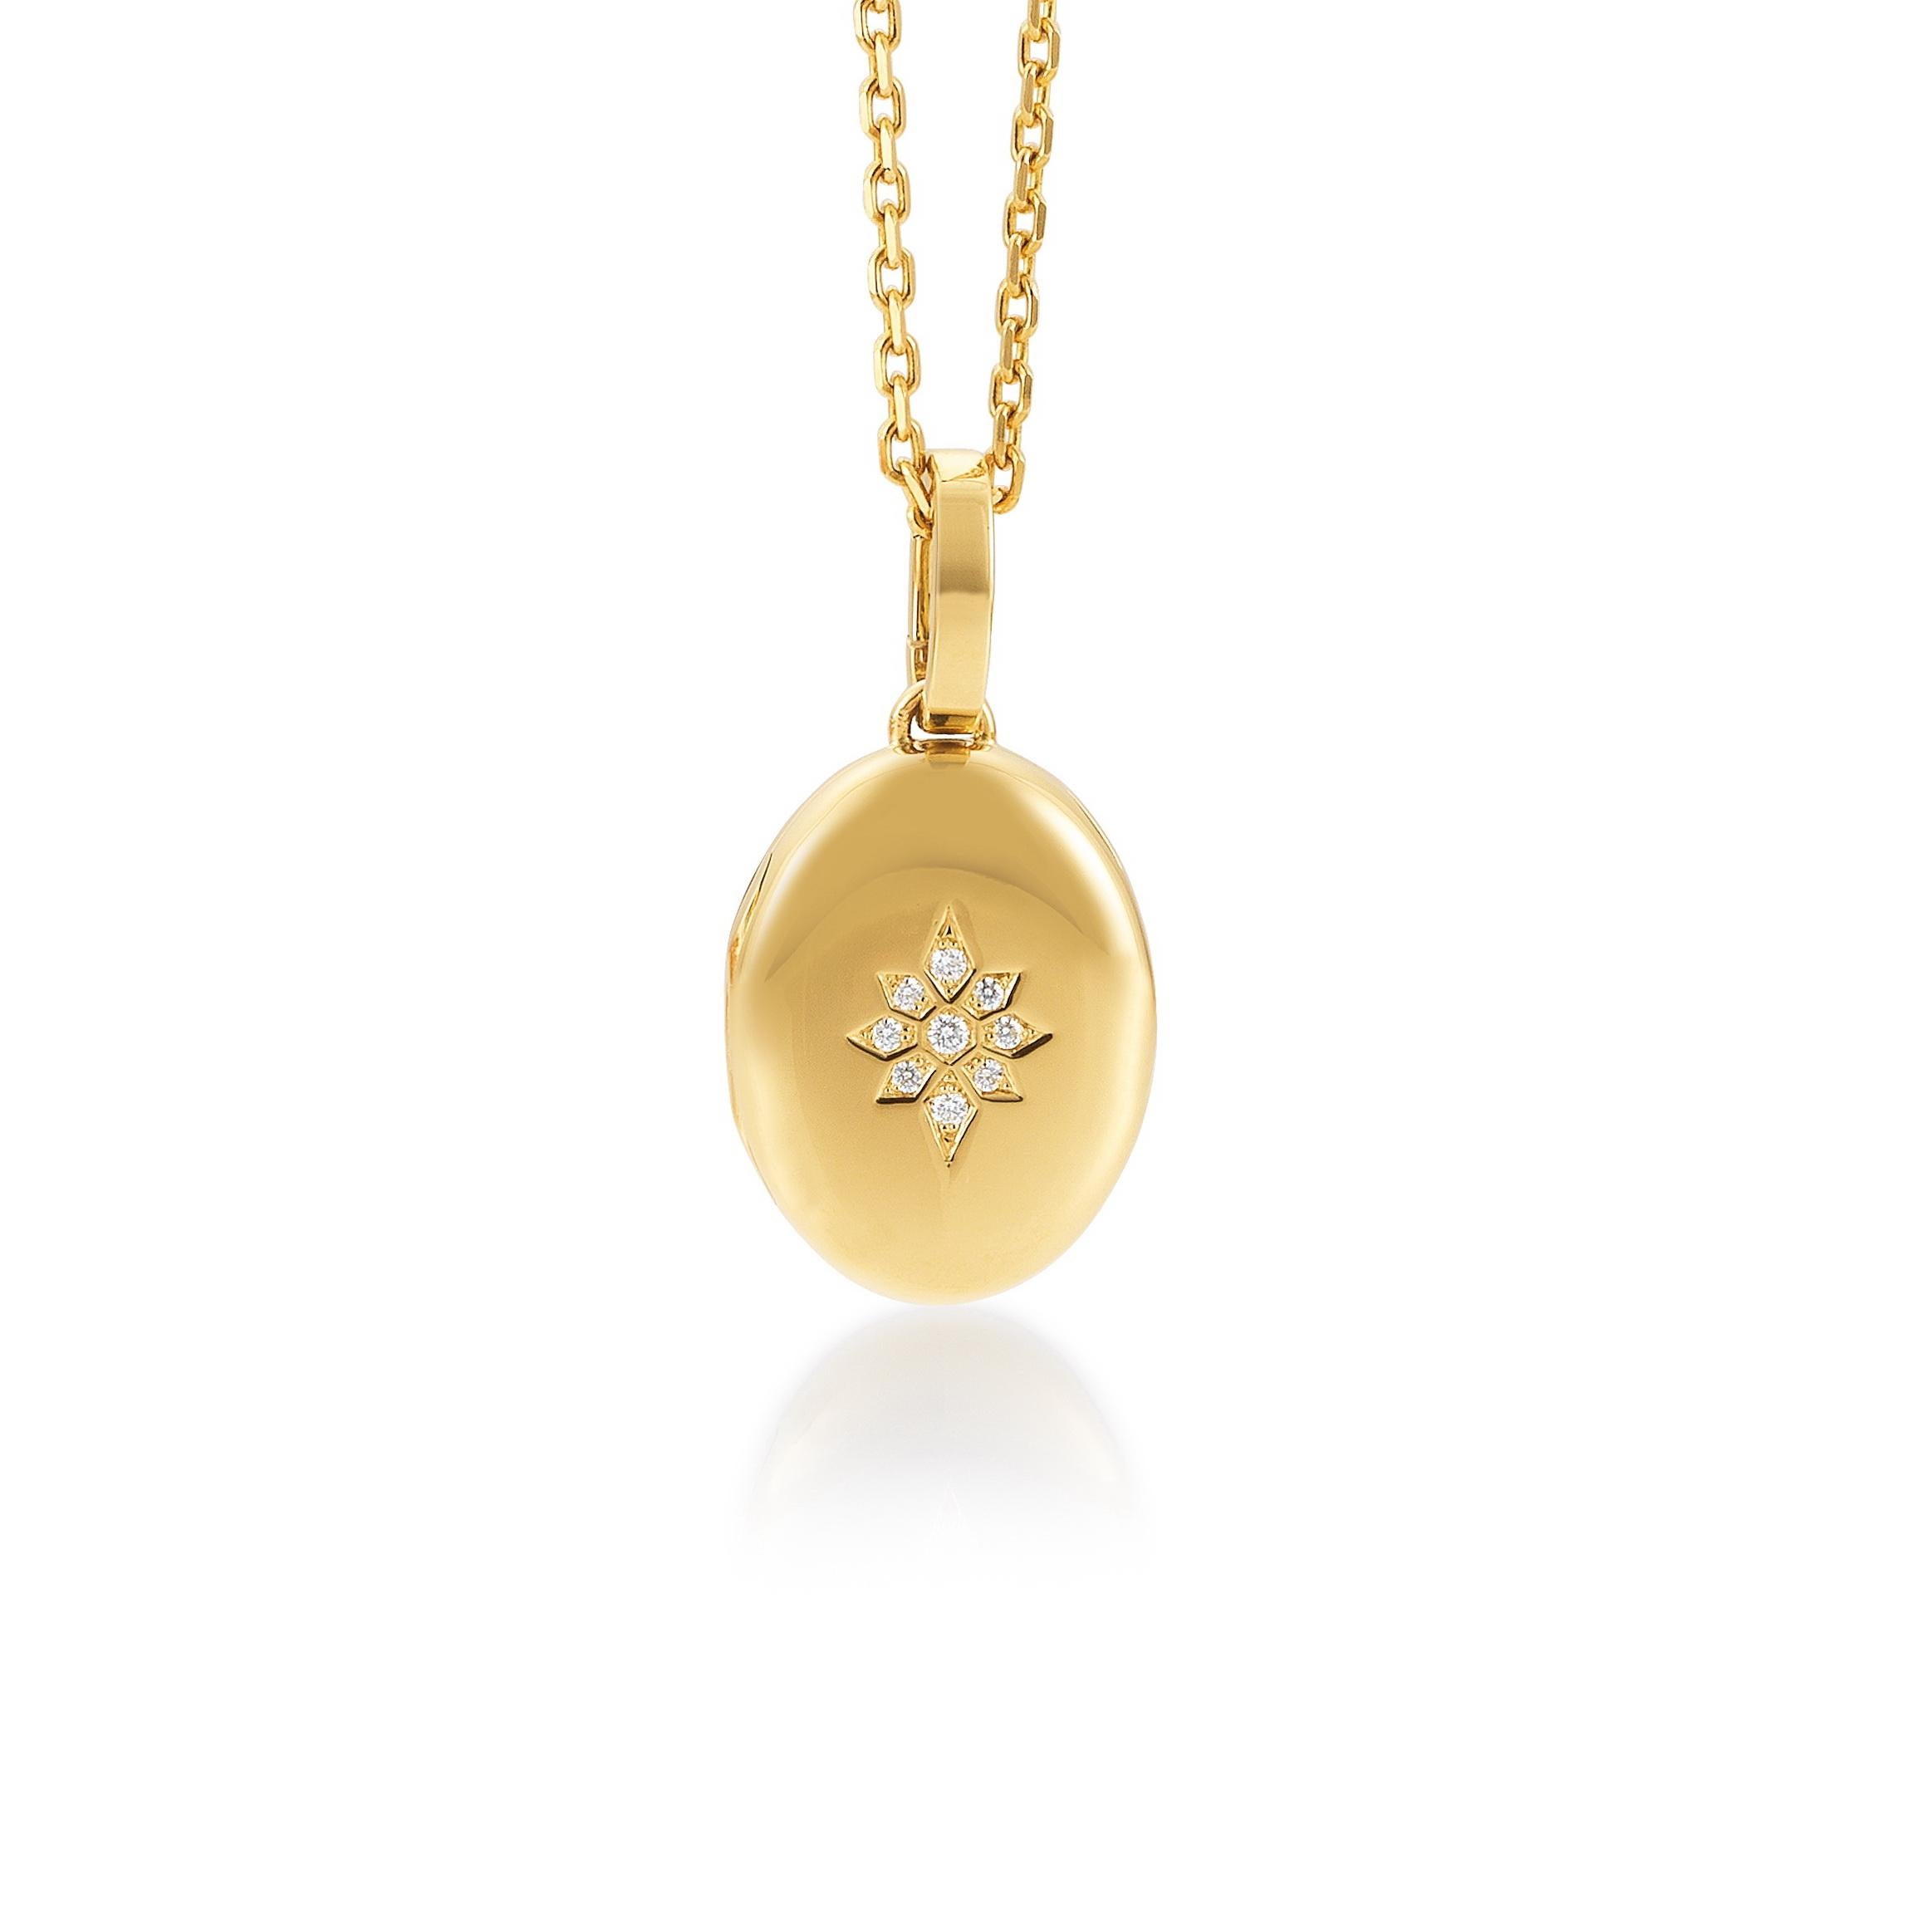 Victorian Heavy Oval Locket Pendant 18k Yellow Gold Star Motif with 9 Diamonds total 0.07 For Sale